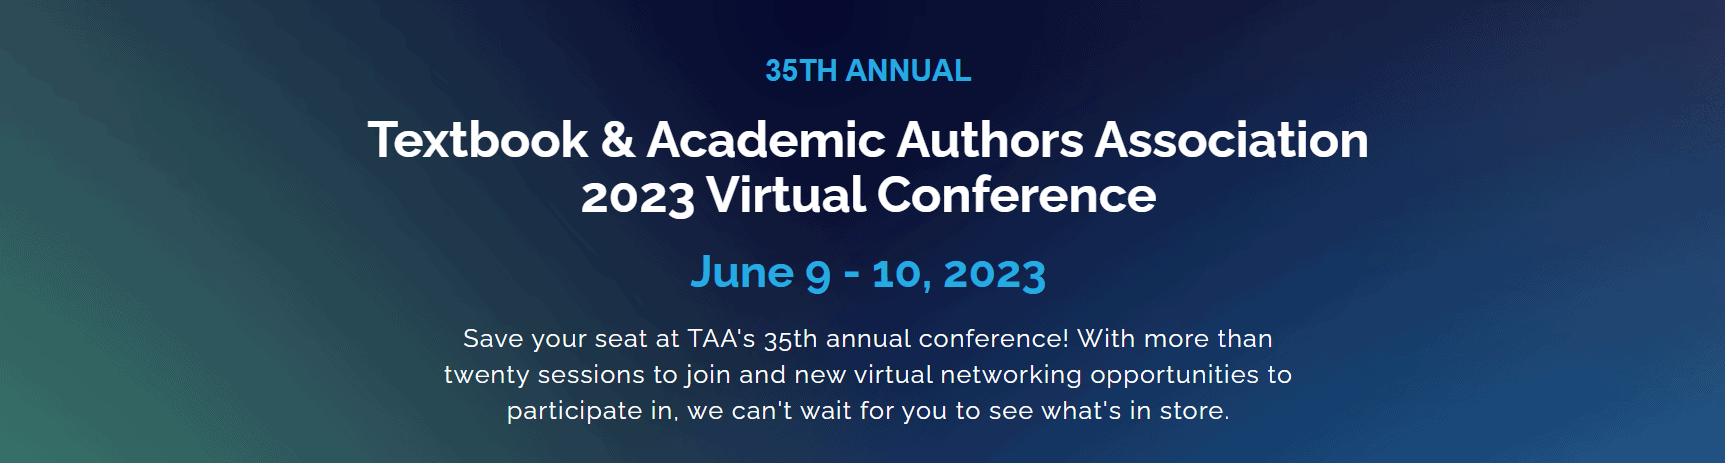 Annual Textbook & Academic Authoring Conference